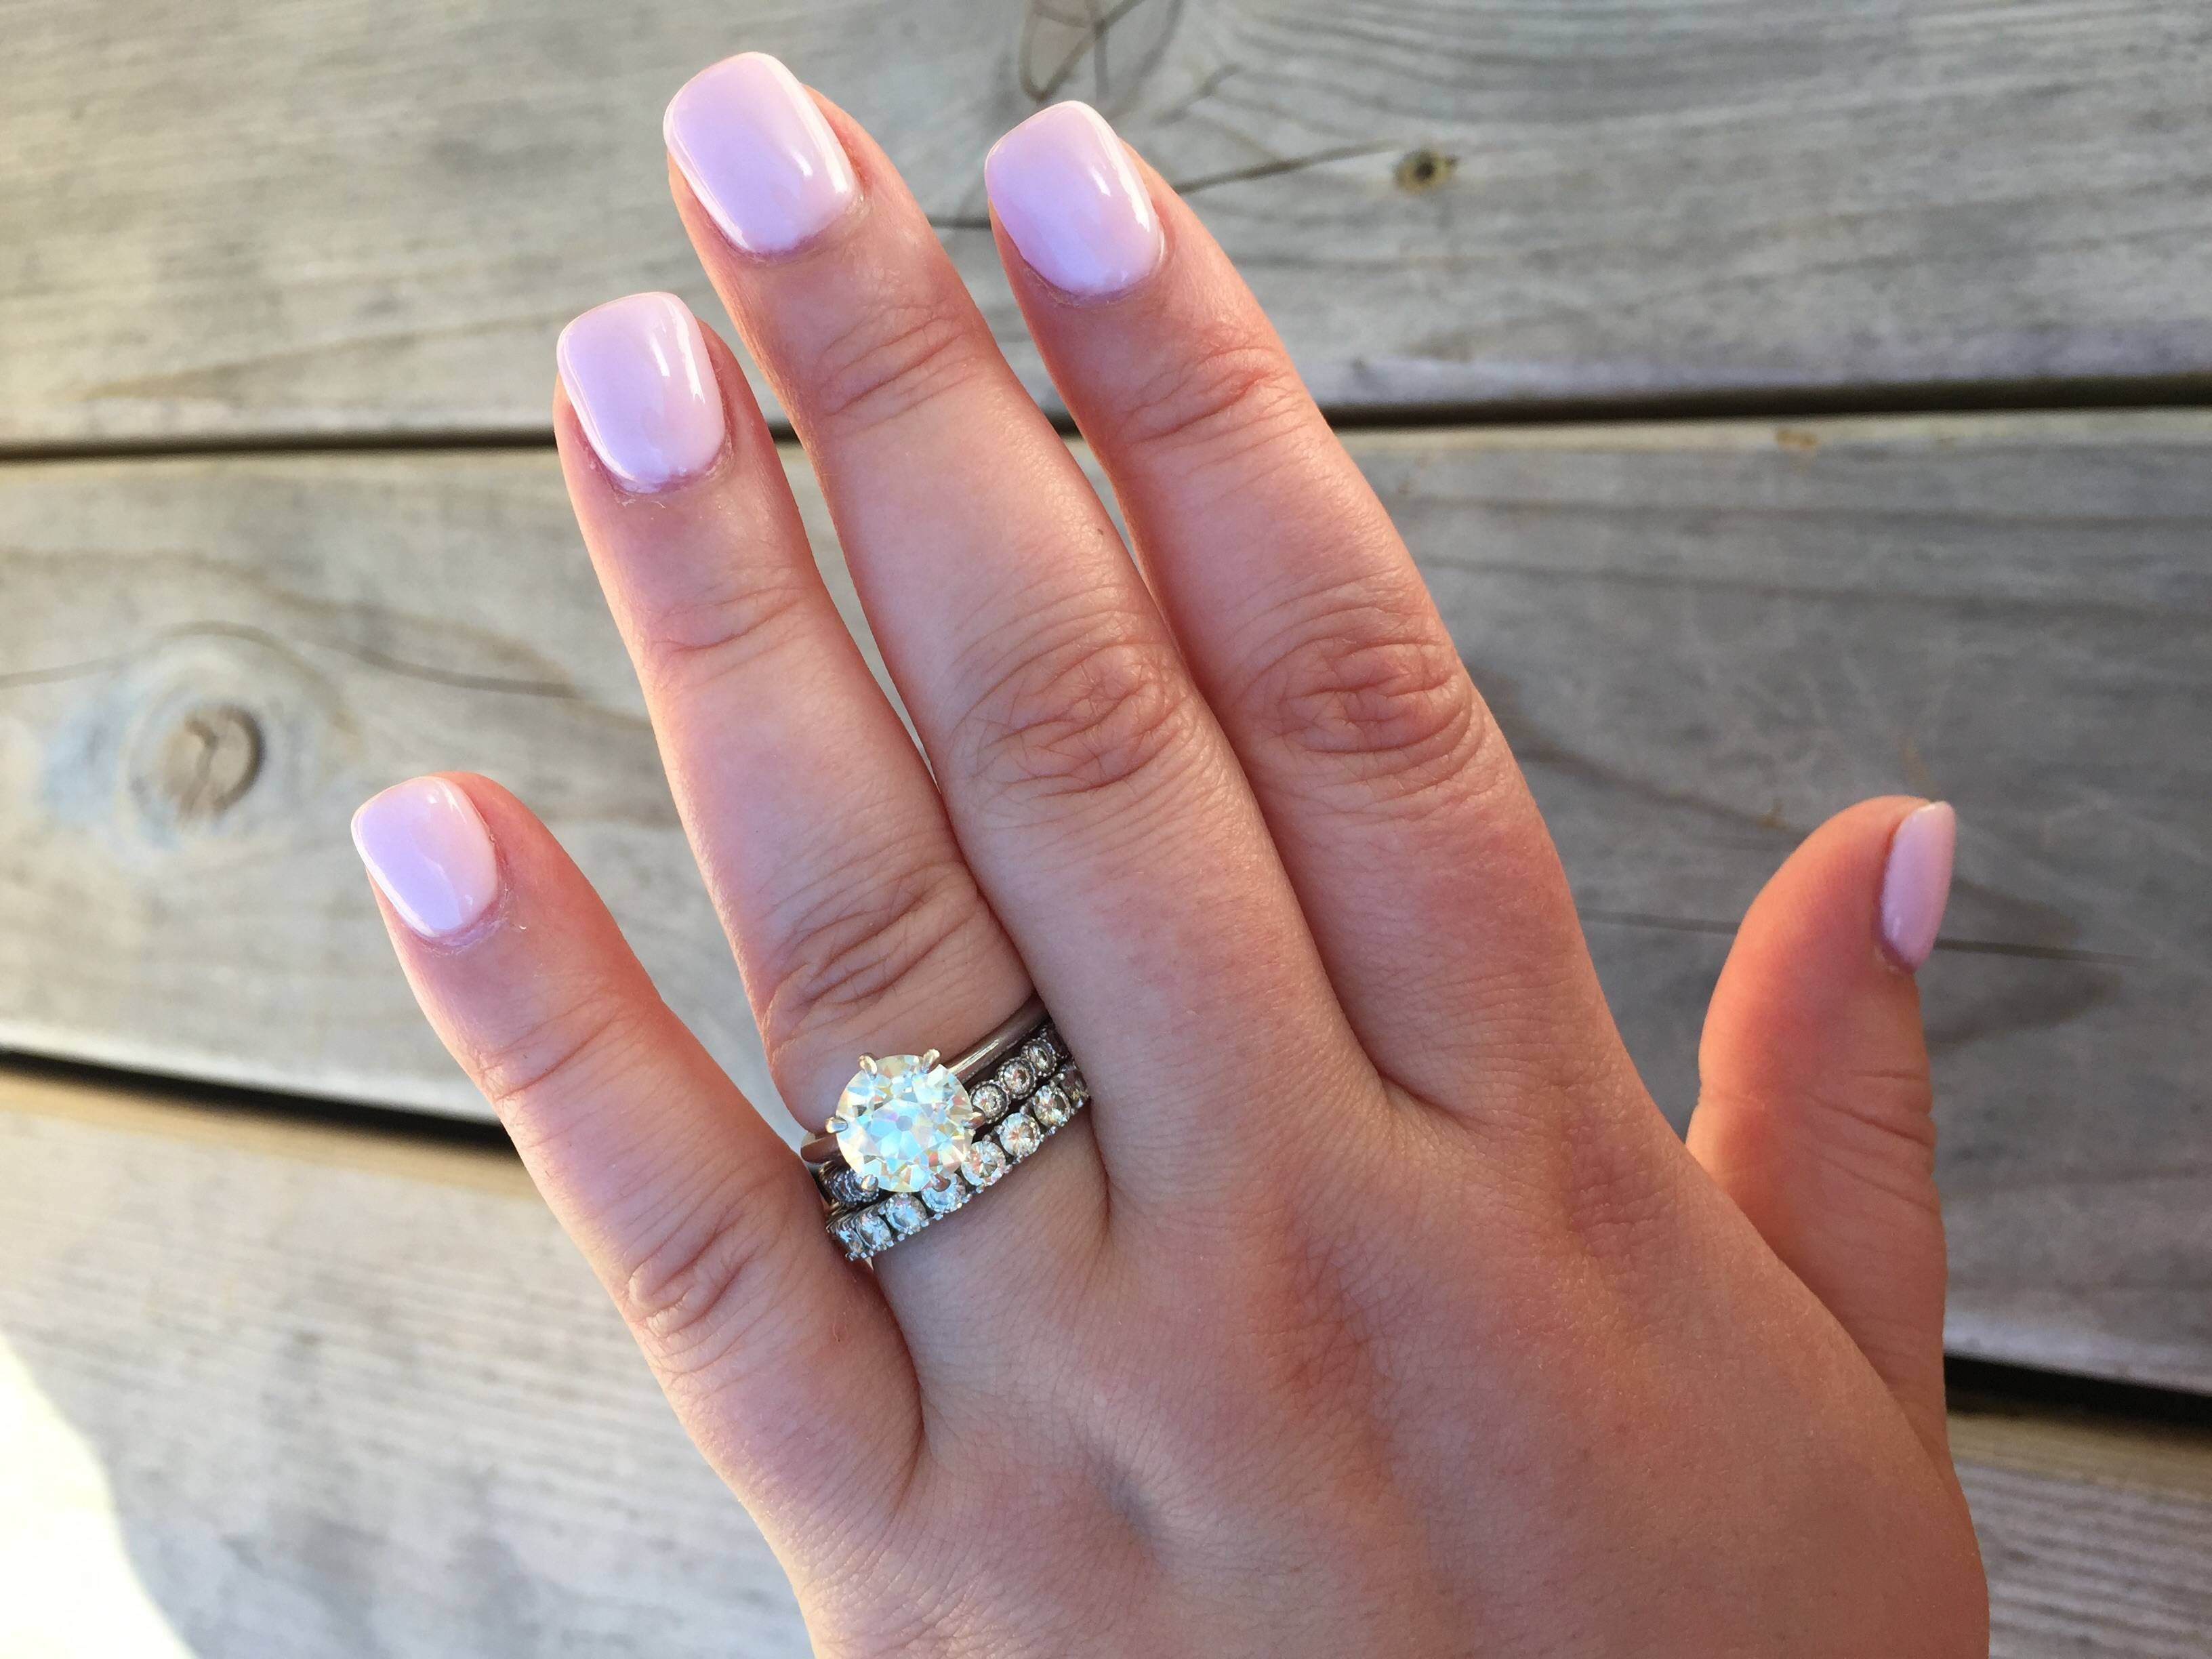 What Kind Of Band Did You Pair With Your Solitaire? Show Them Off For 2018 1 Year Anniversary Rings (View 4 of 15)